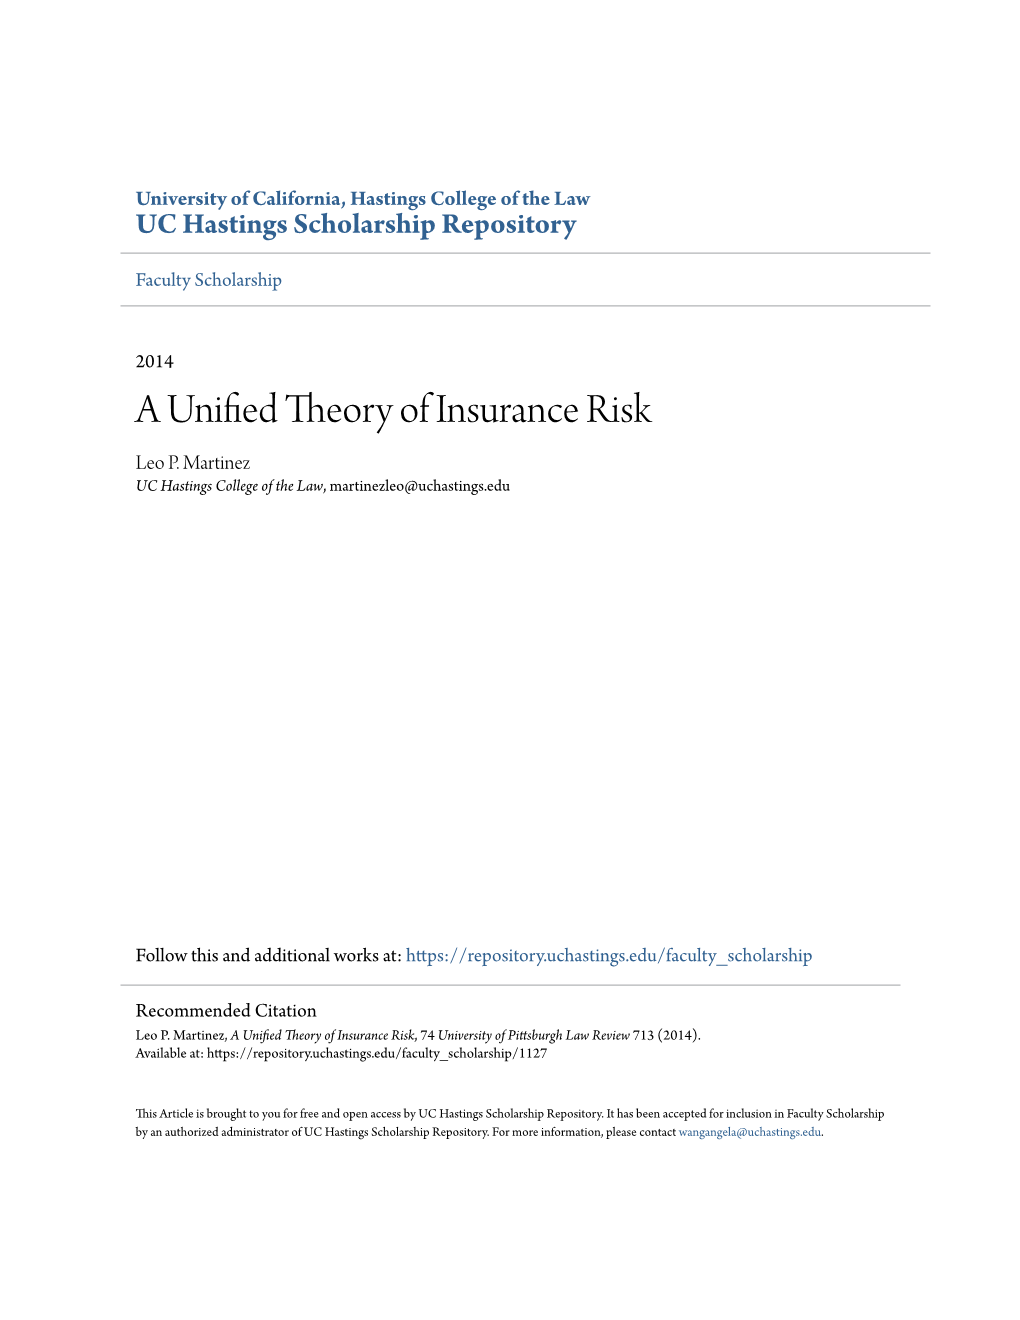 A Unified Theory of Insurance Risk Leo P